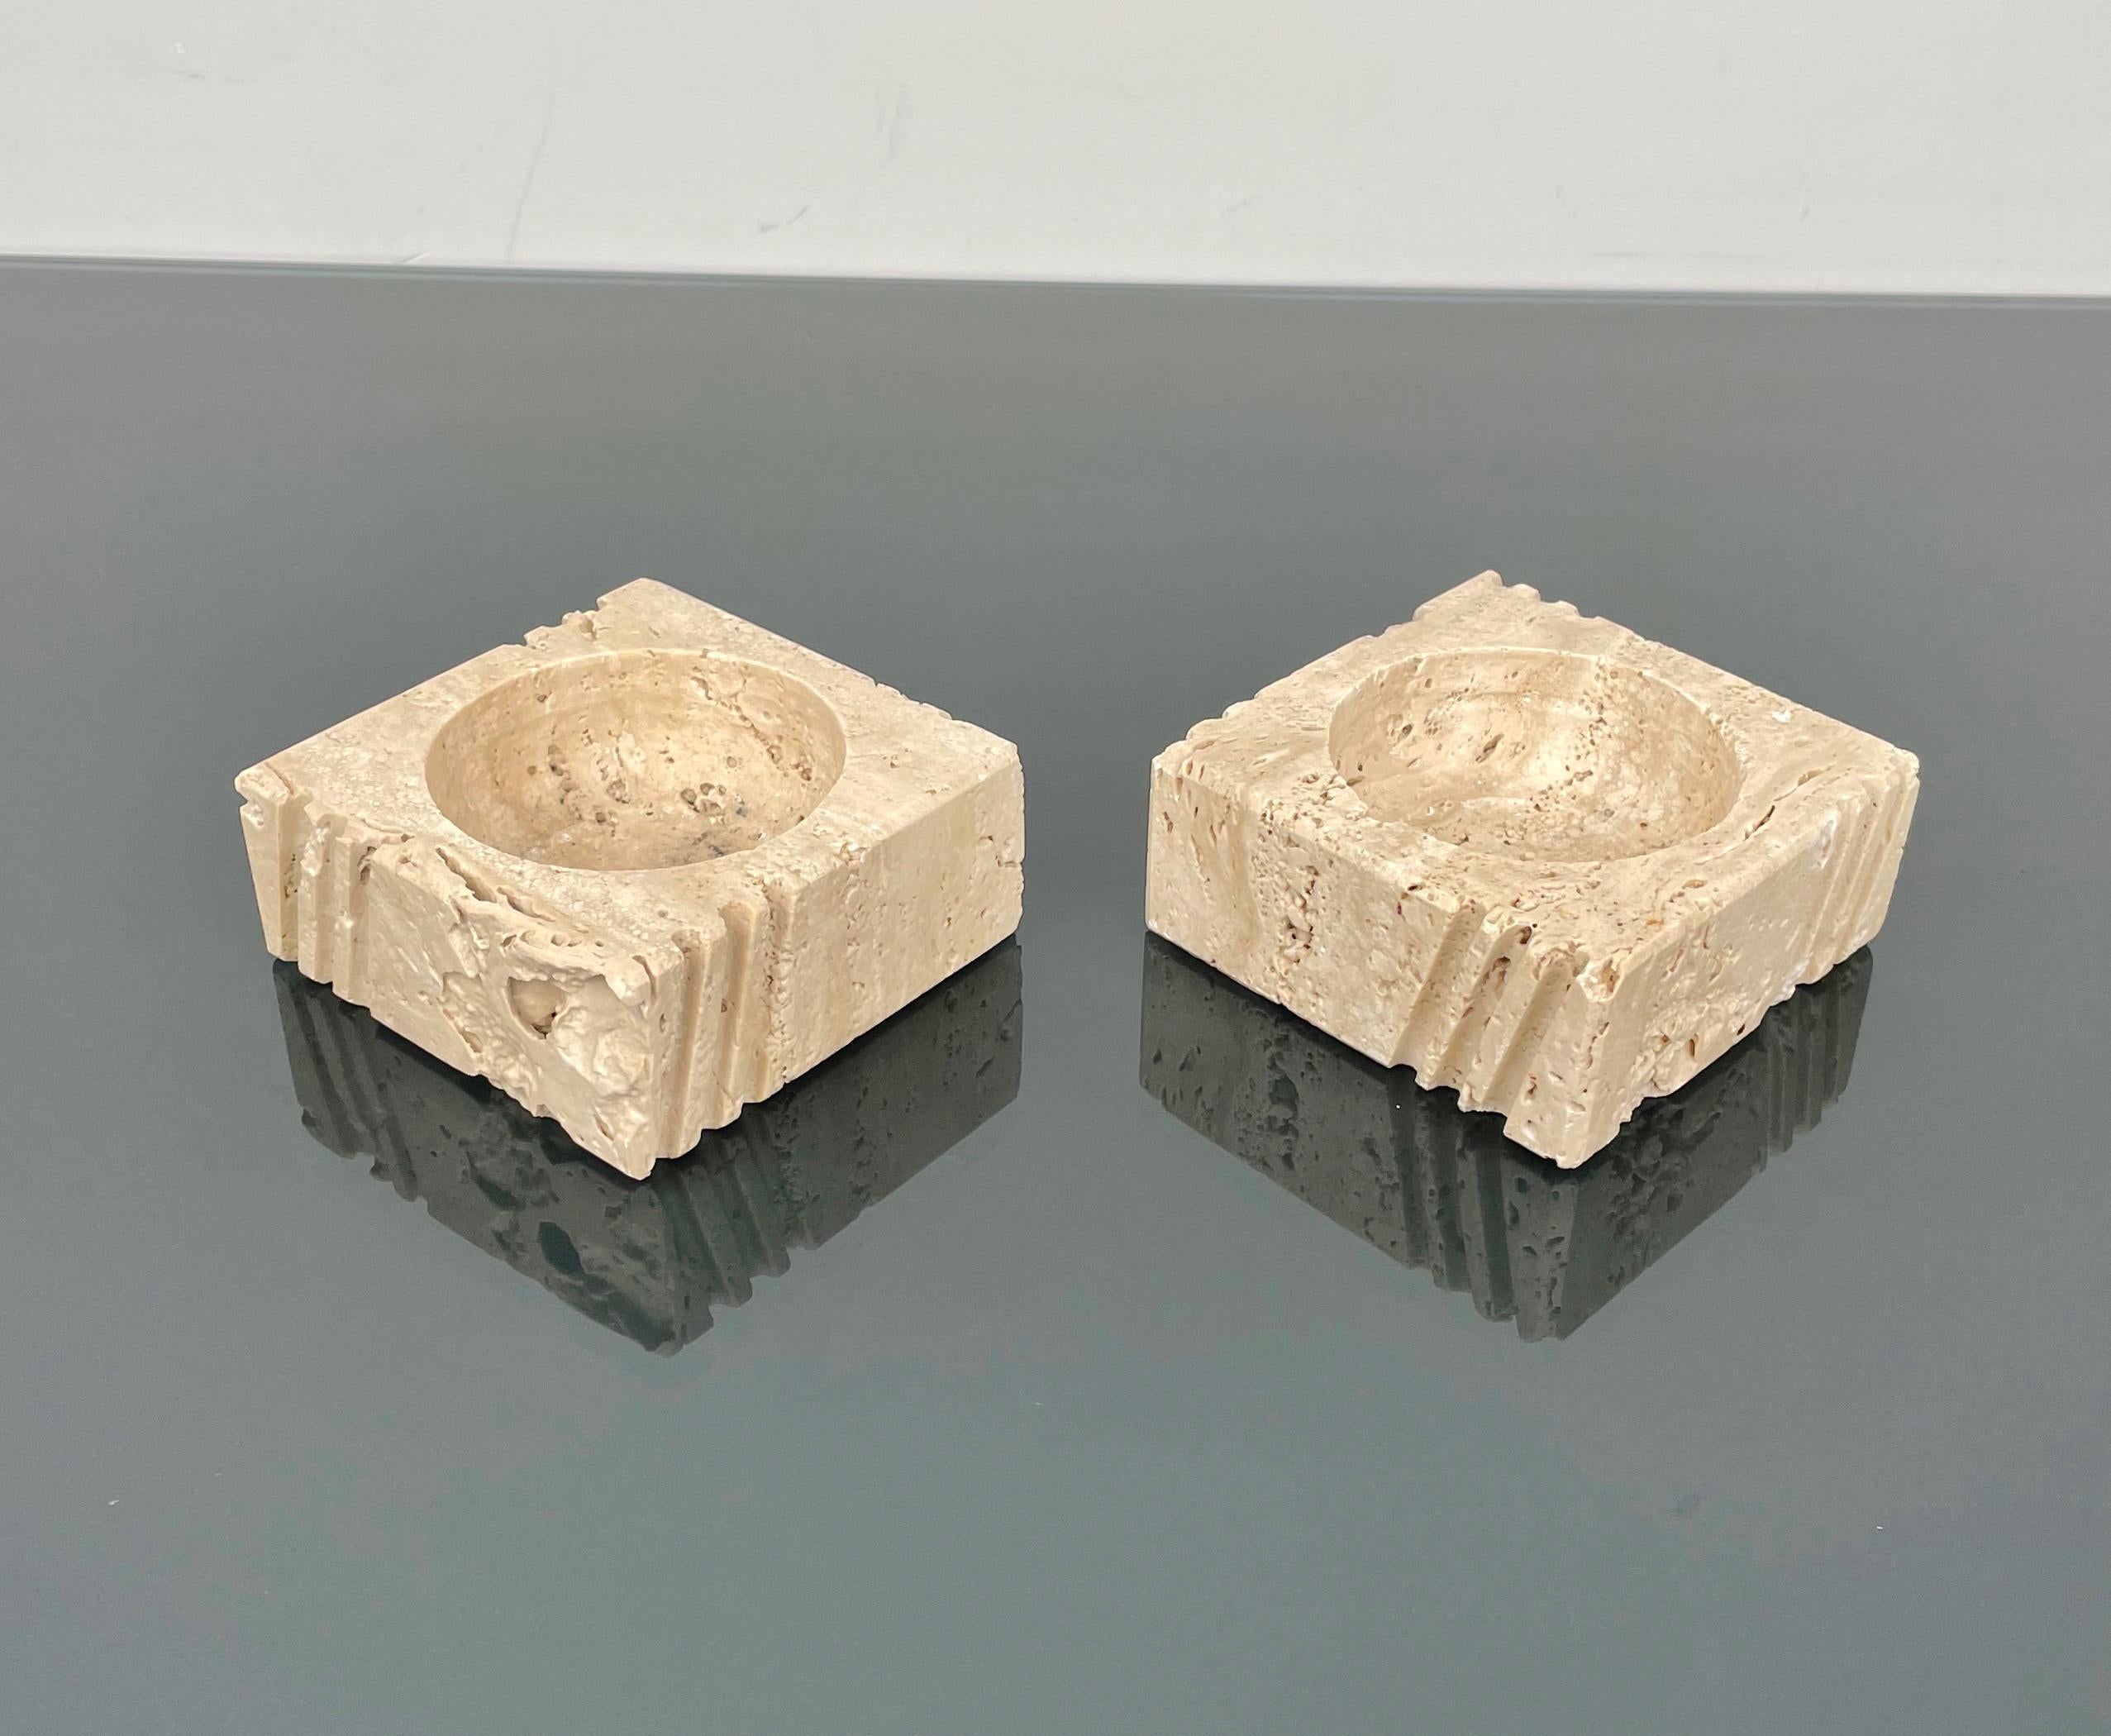 Pair of squared ashtrays or candle holders in travertine marble attributed to Fratelli Mannelli. 

Made in Italy in the 1970s.